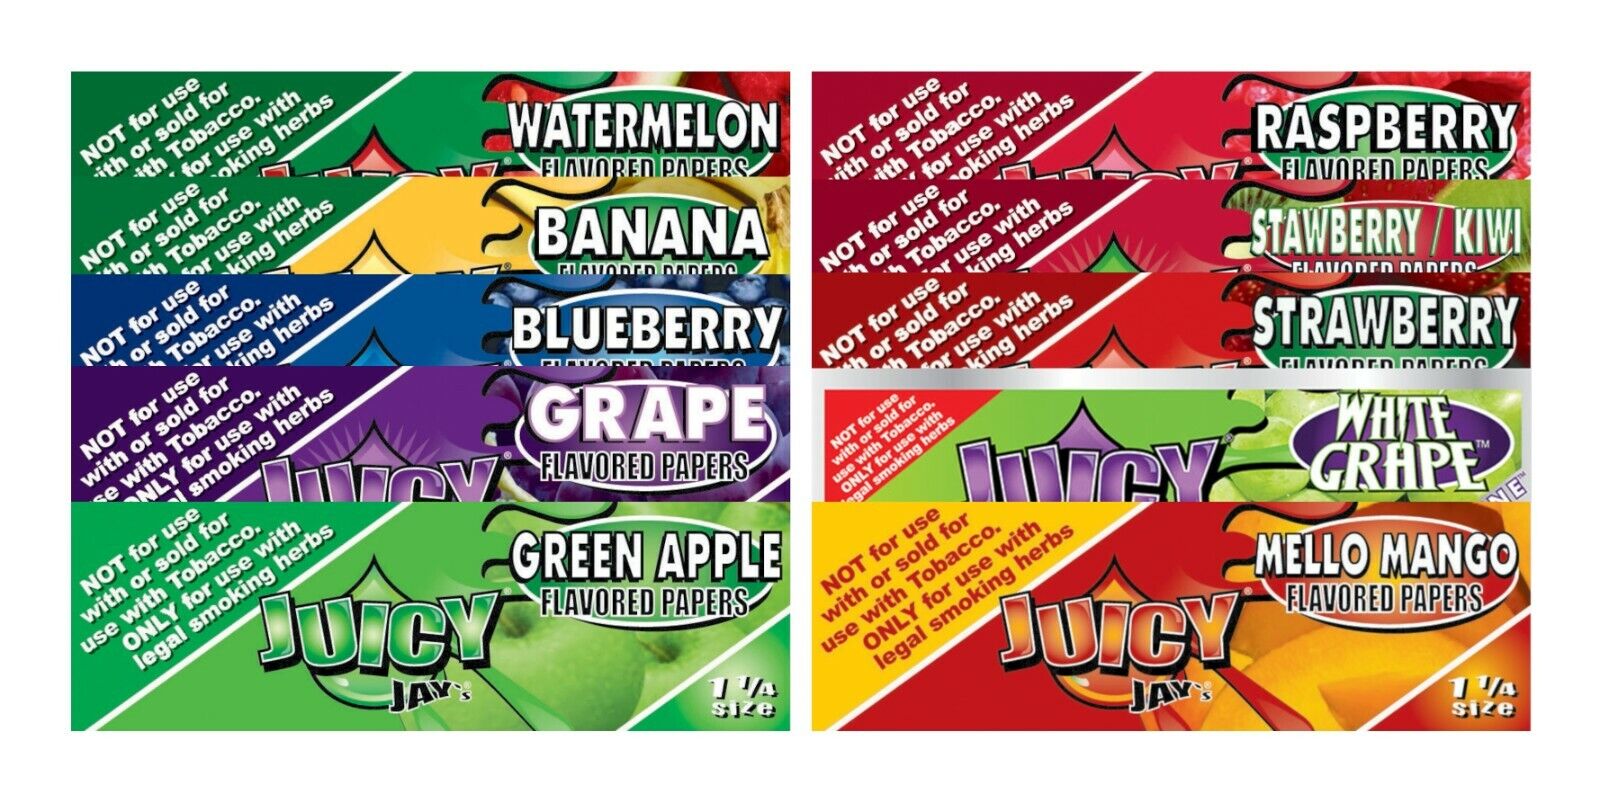 Juicy Jay's Variety 5 Flavored Rolling Papers 1.25 10 Packs